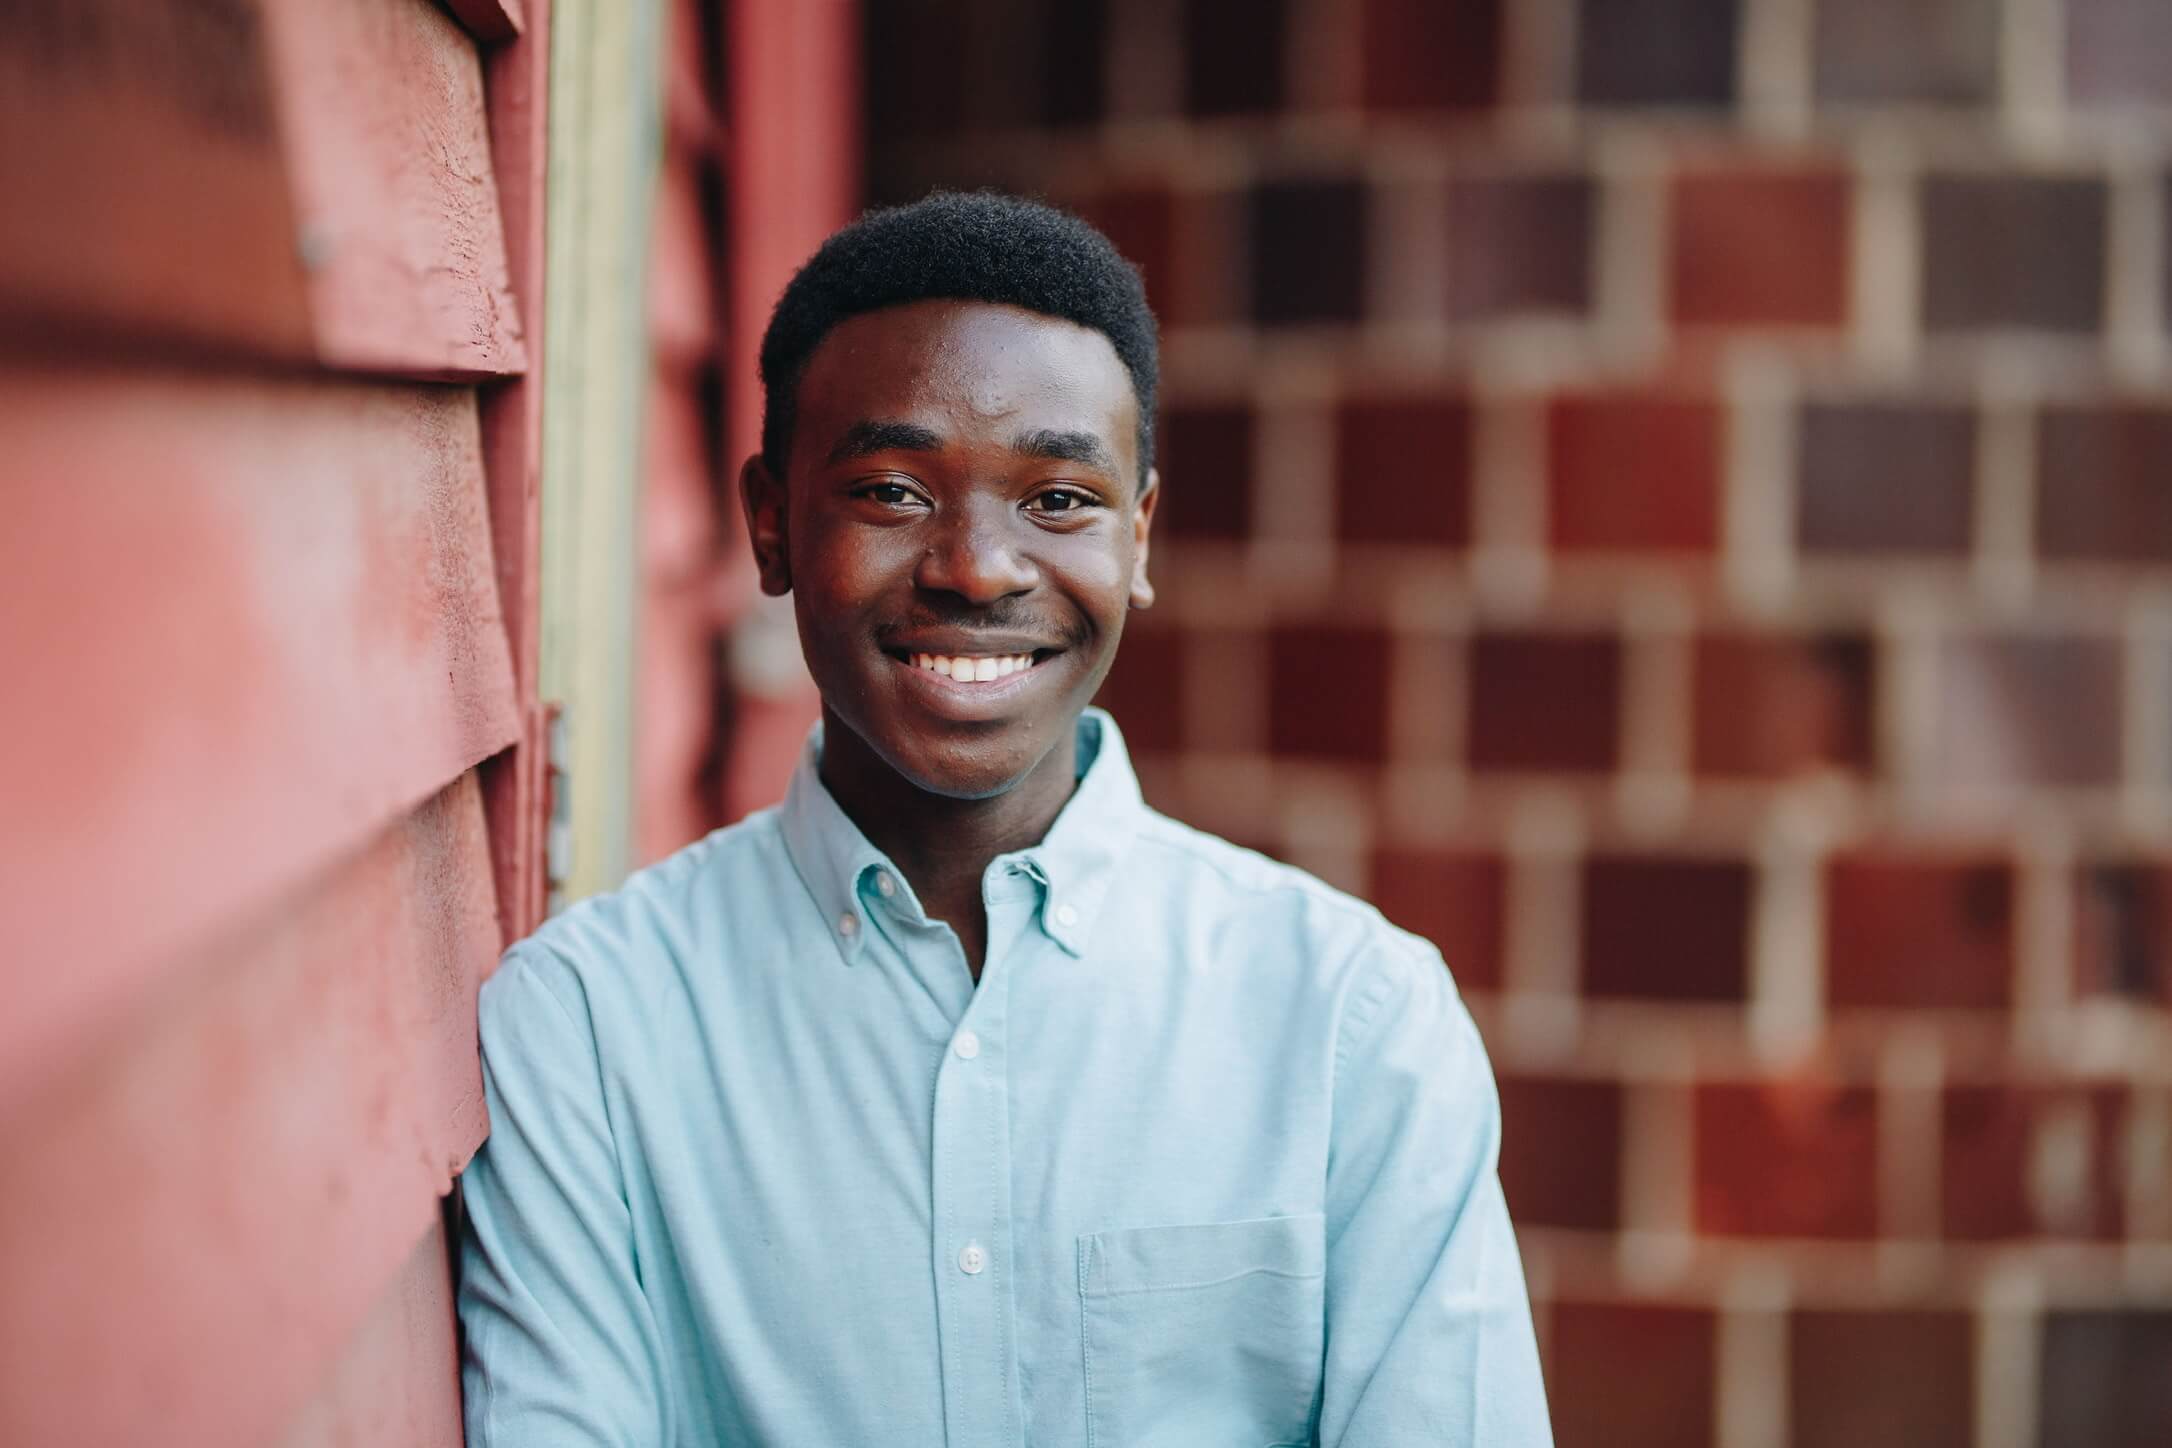 From Tanzania to Indiana: One high schooler's dream to reach the Ivy League